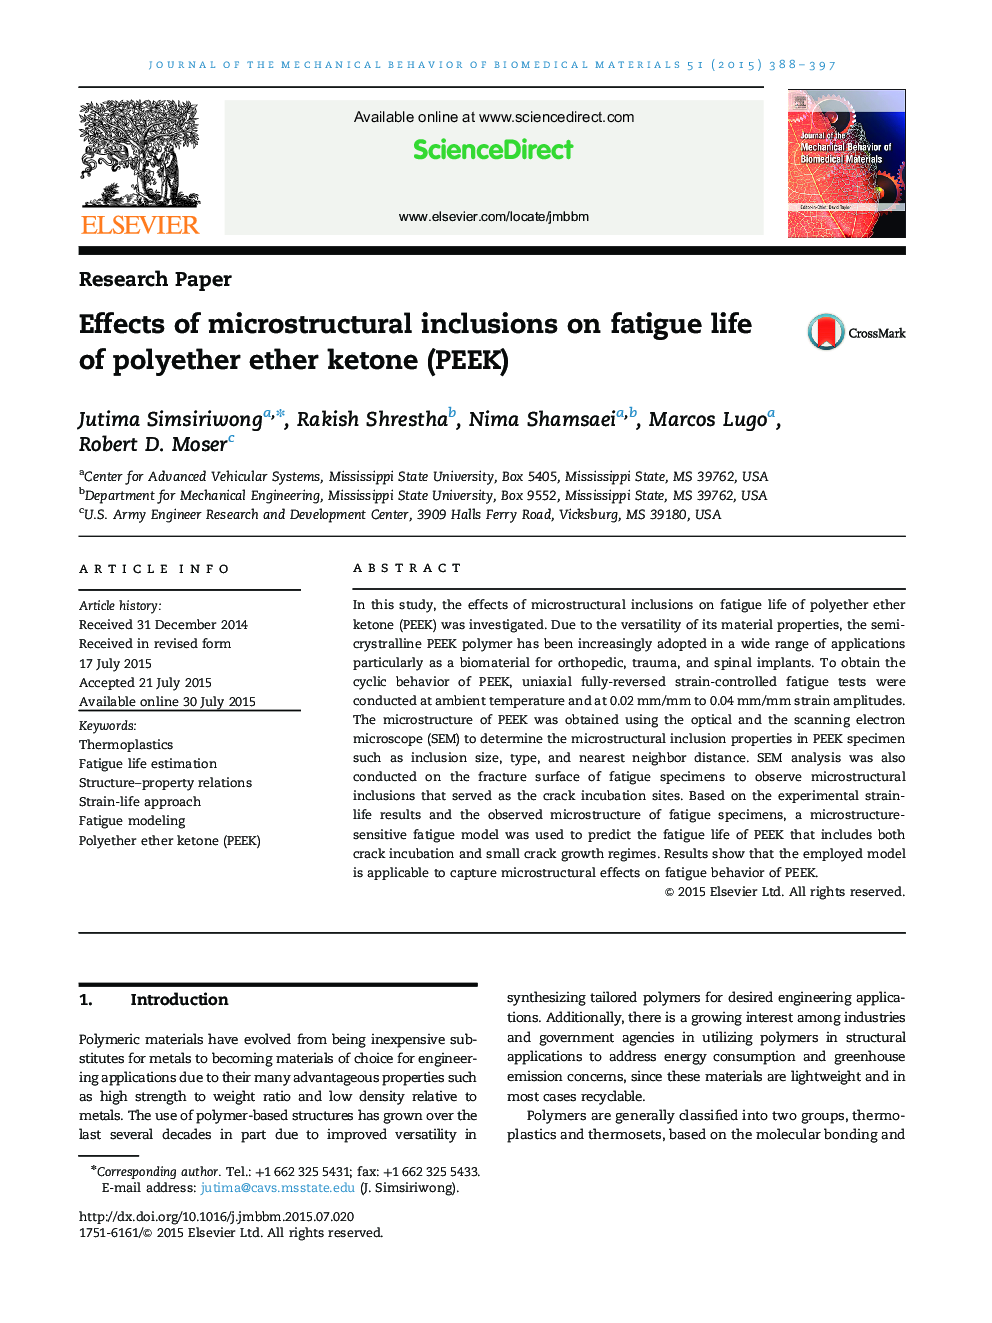 Effects of microstructural inclusions on fatigue life of polyether ether ketone (PEEK)